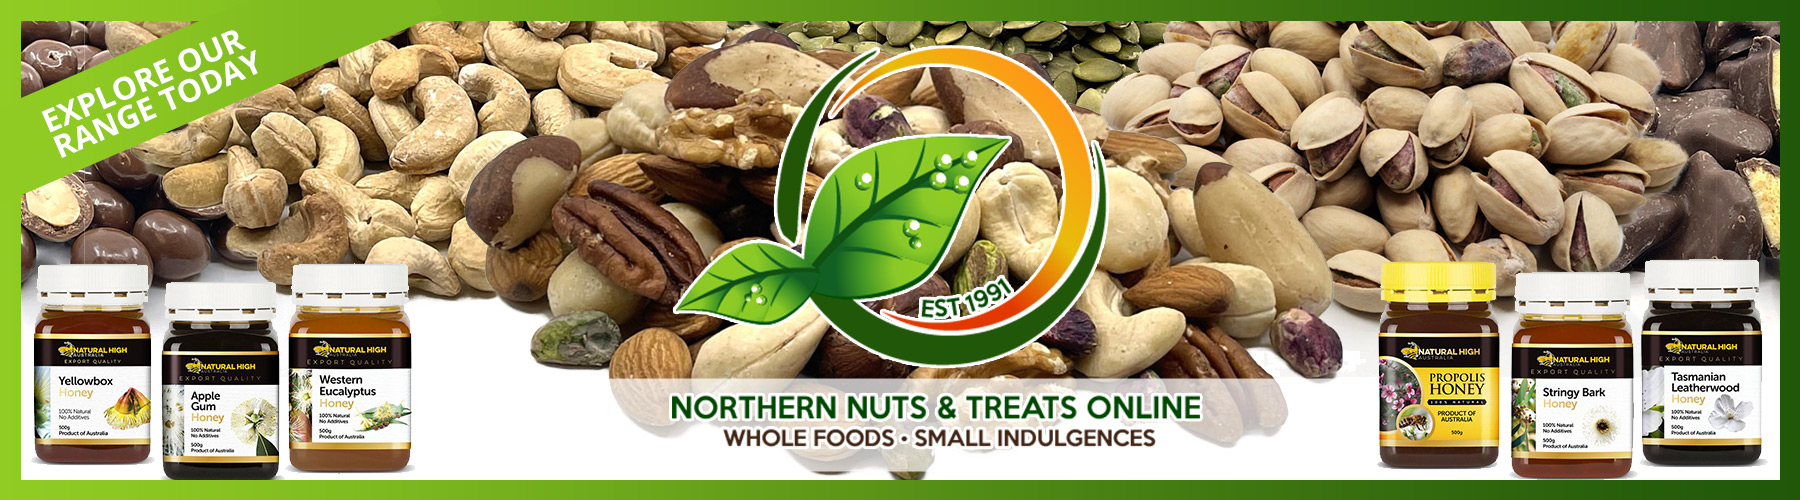 Northern Nuts and Treats